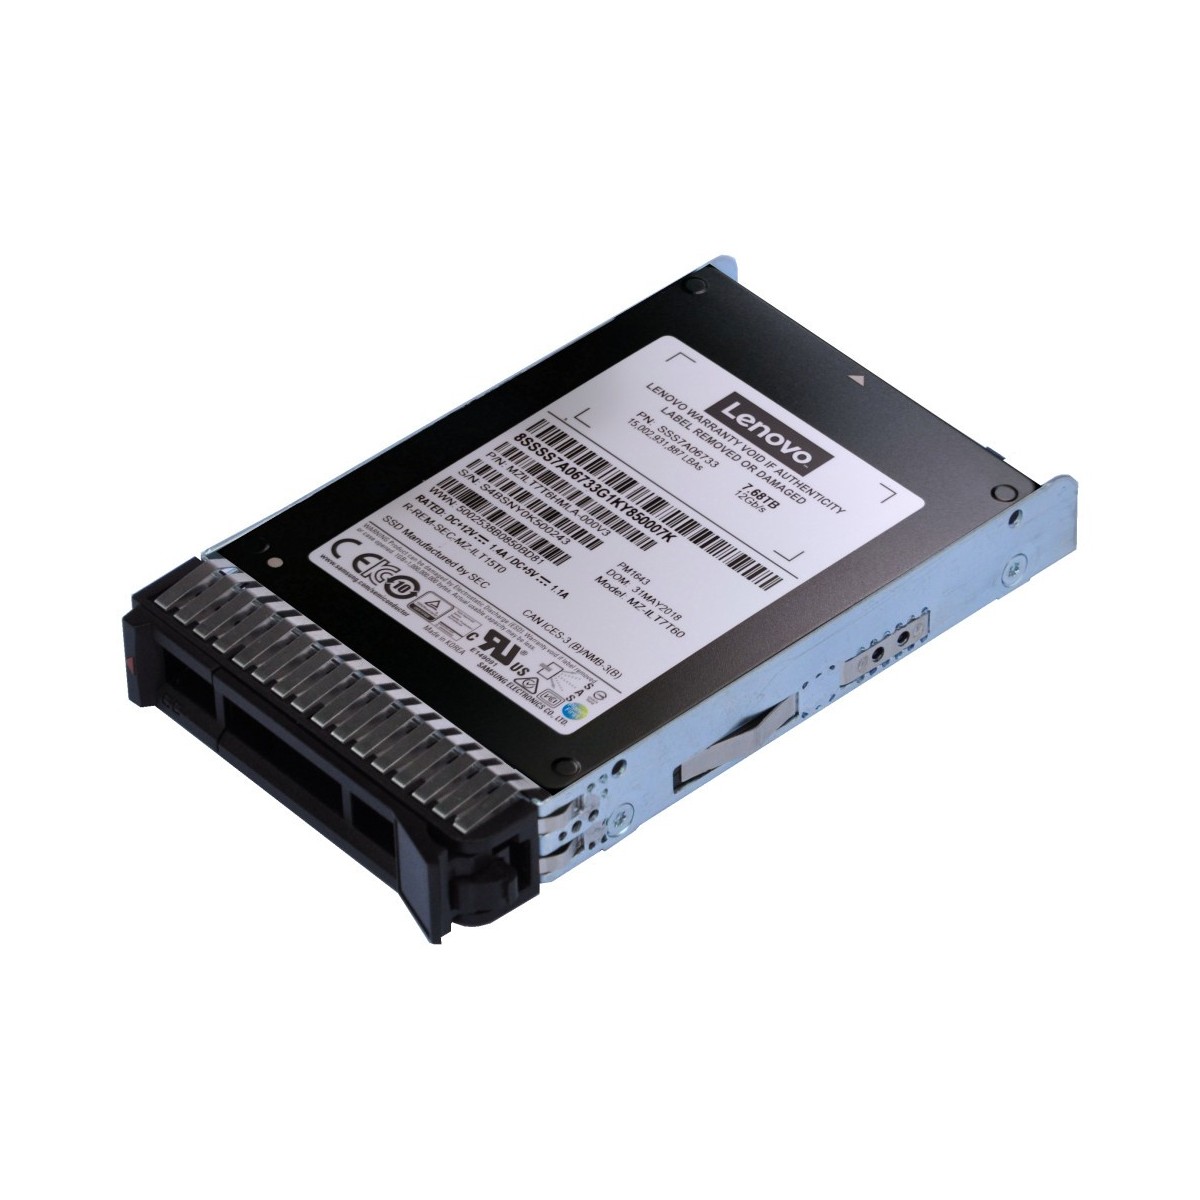 Lenovo ThinkSystem 2.5 PM1643a 7.68TB Entry - Solid State Disk - Serial Attached SCSI (SAS)